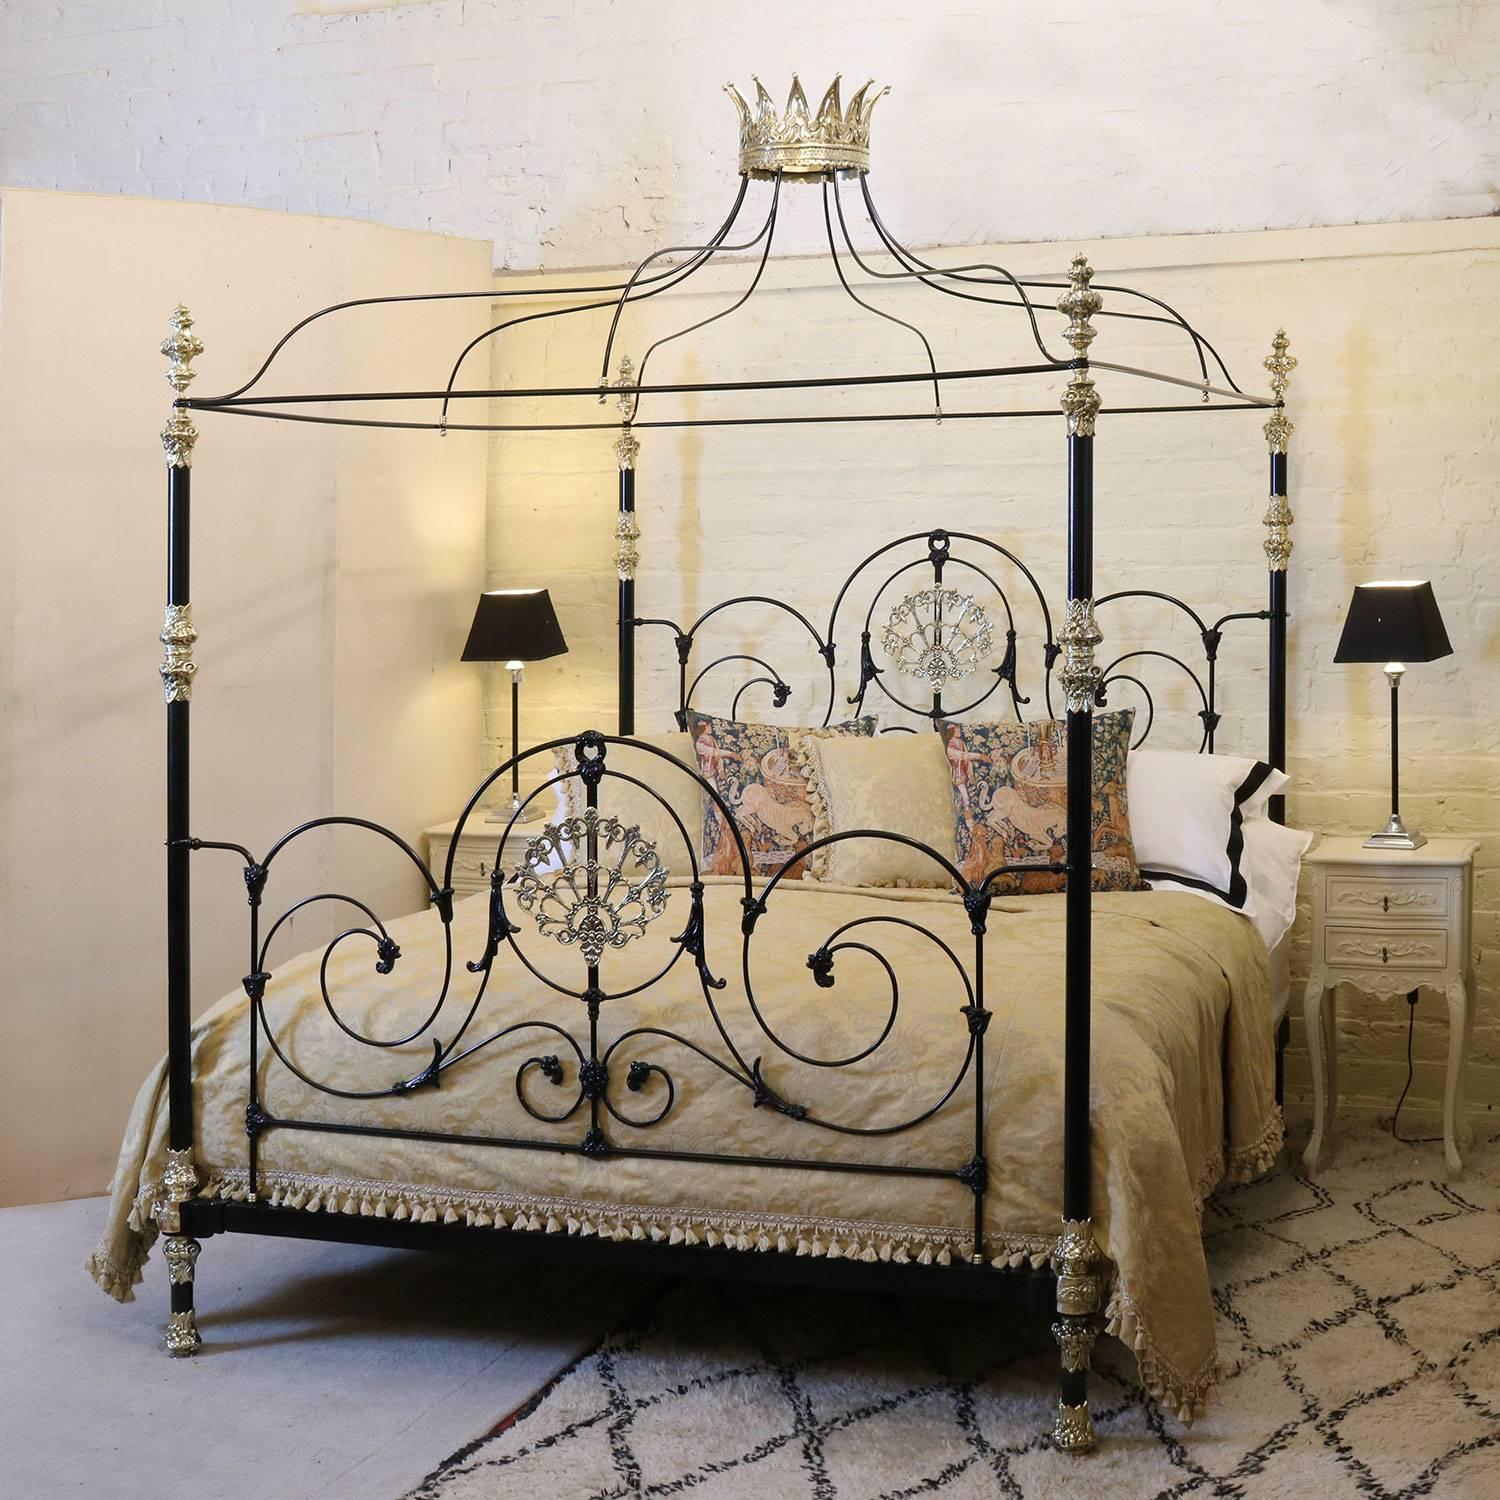 A made-to-order bespoke four poster bed with ornate brass castings, tentacle canopy and brass crown. This handcrafted bed is a bespoke piece designed with specific dimensions. The bed is currently black but other colours are optional, including